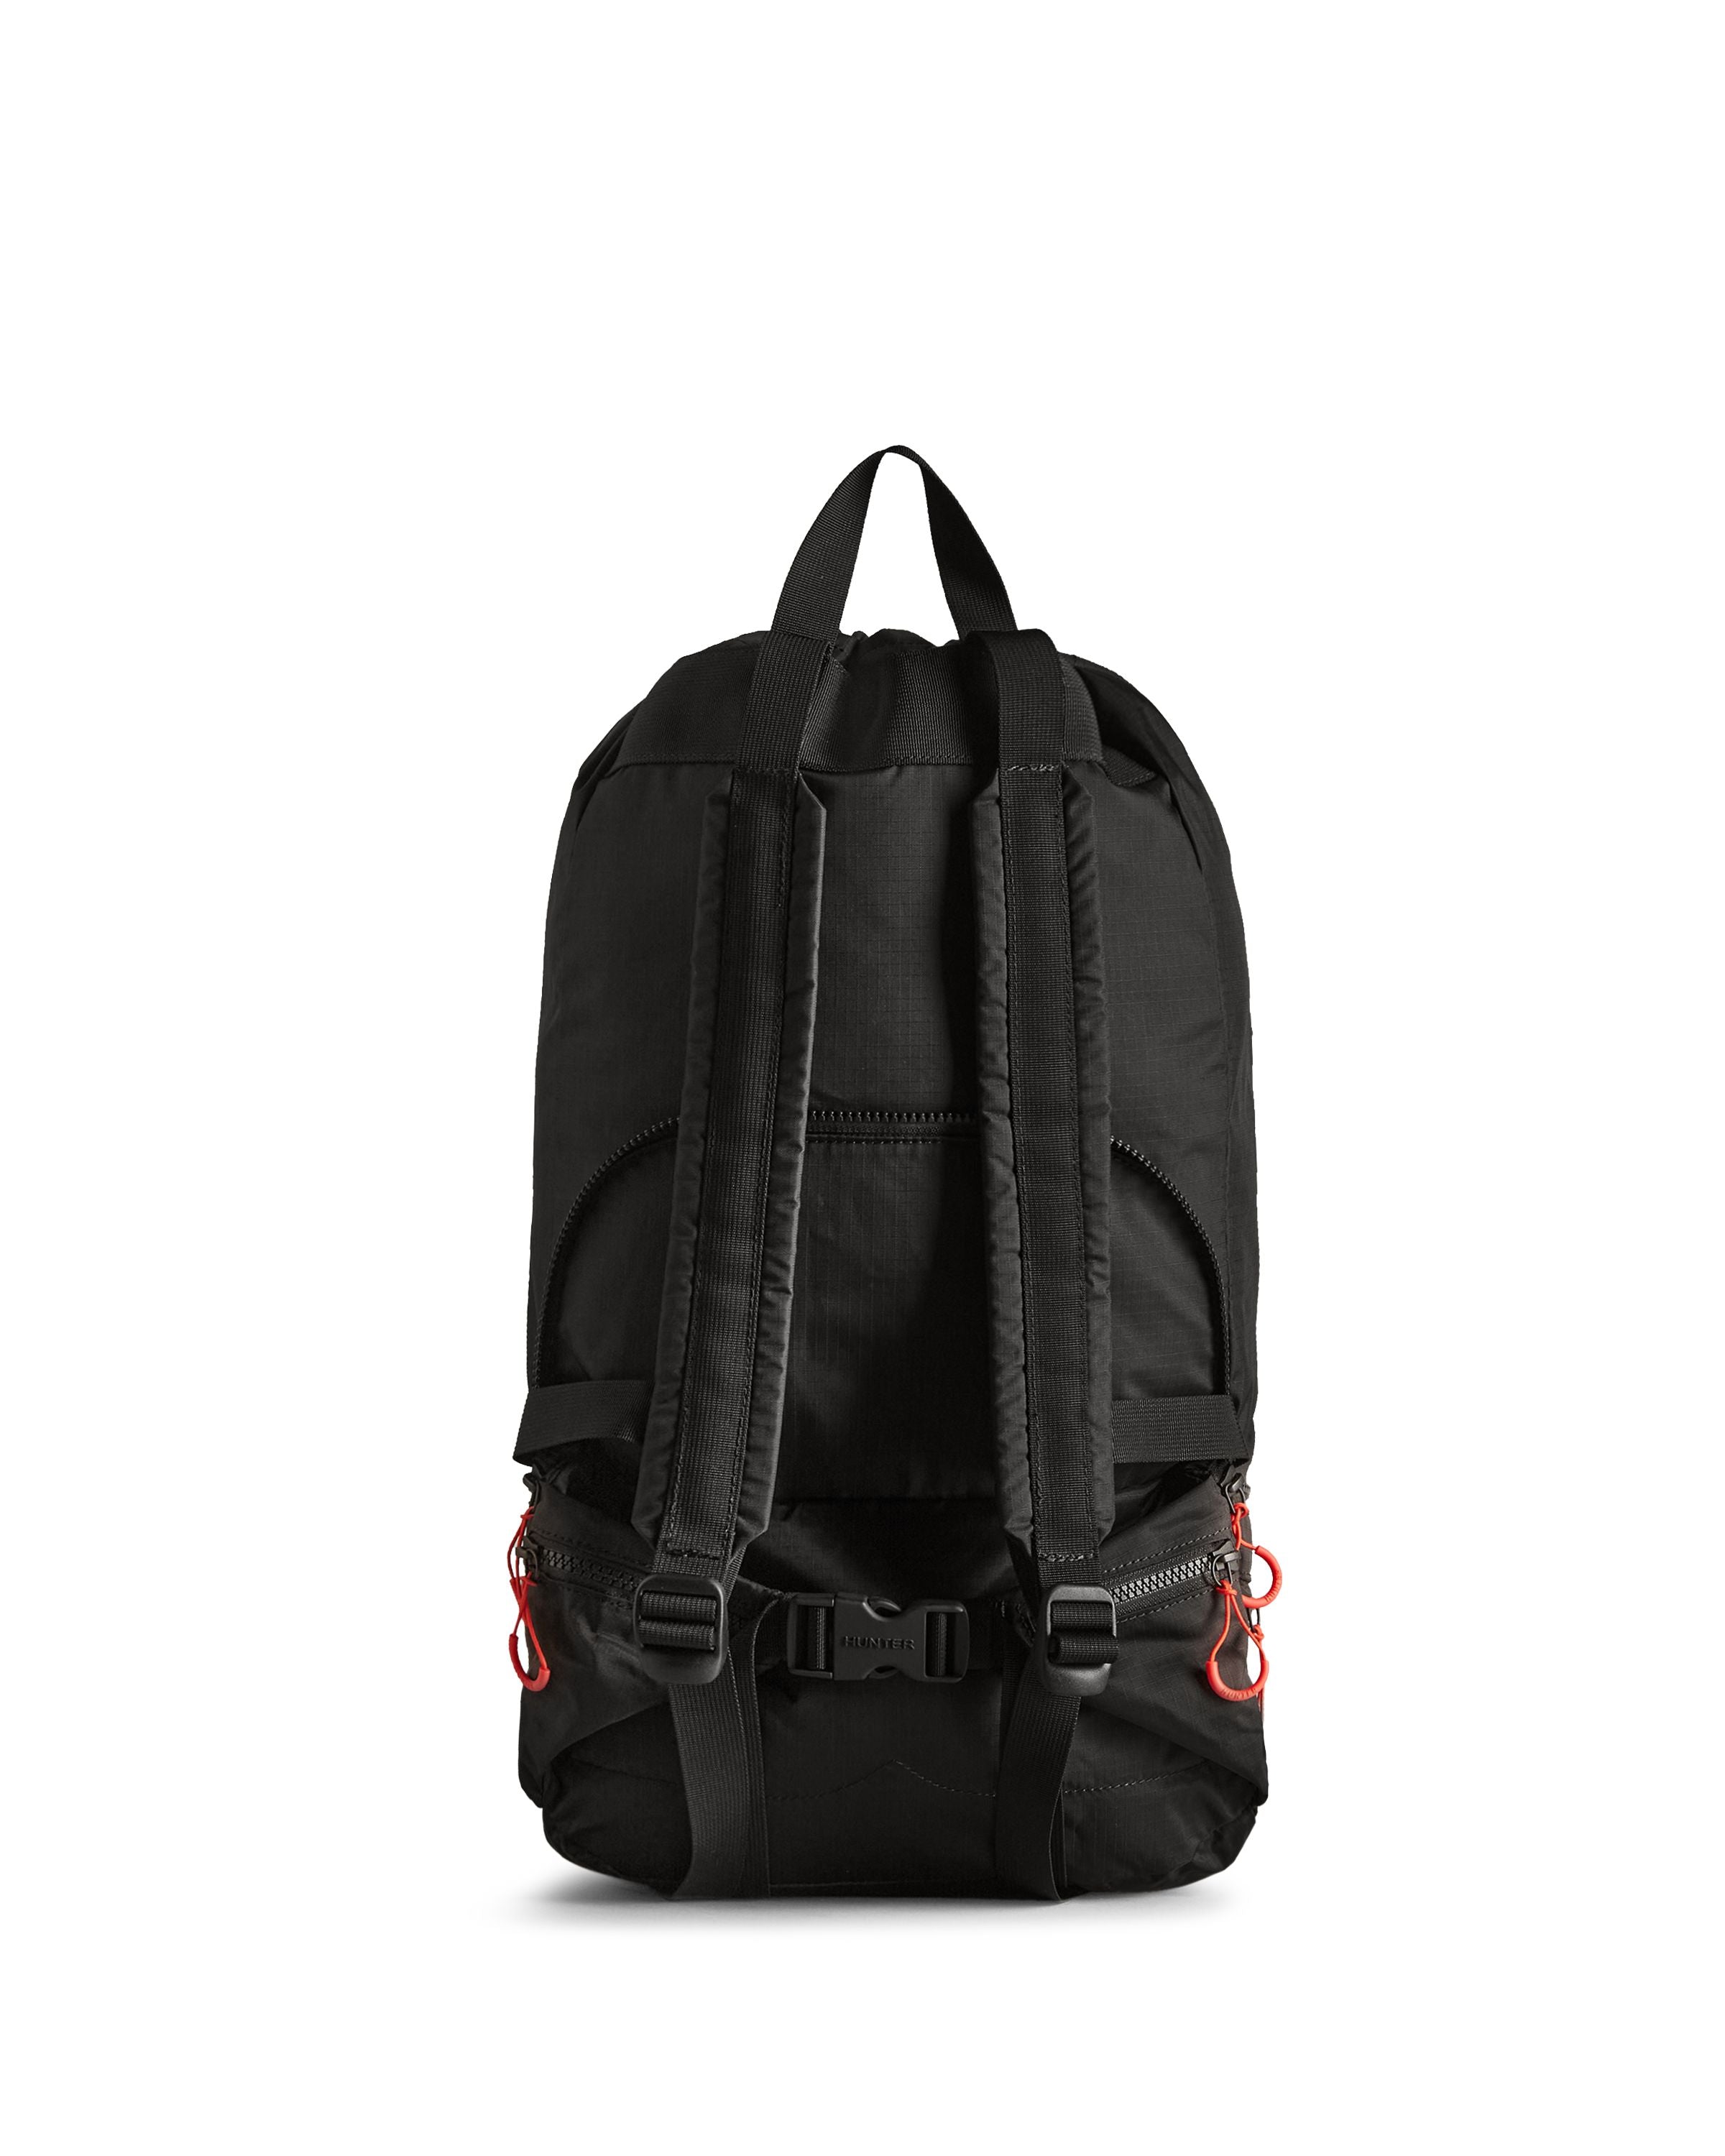 Travel Ripstop Recycled Nylon 2Way Backpack - Black/Red Box Logo